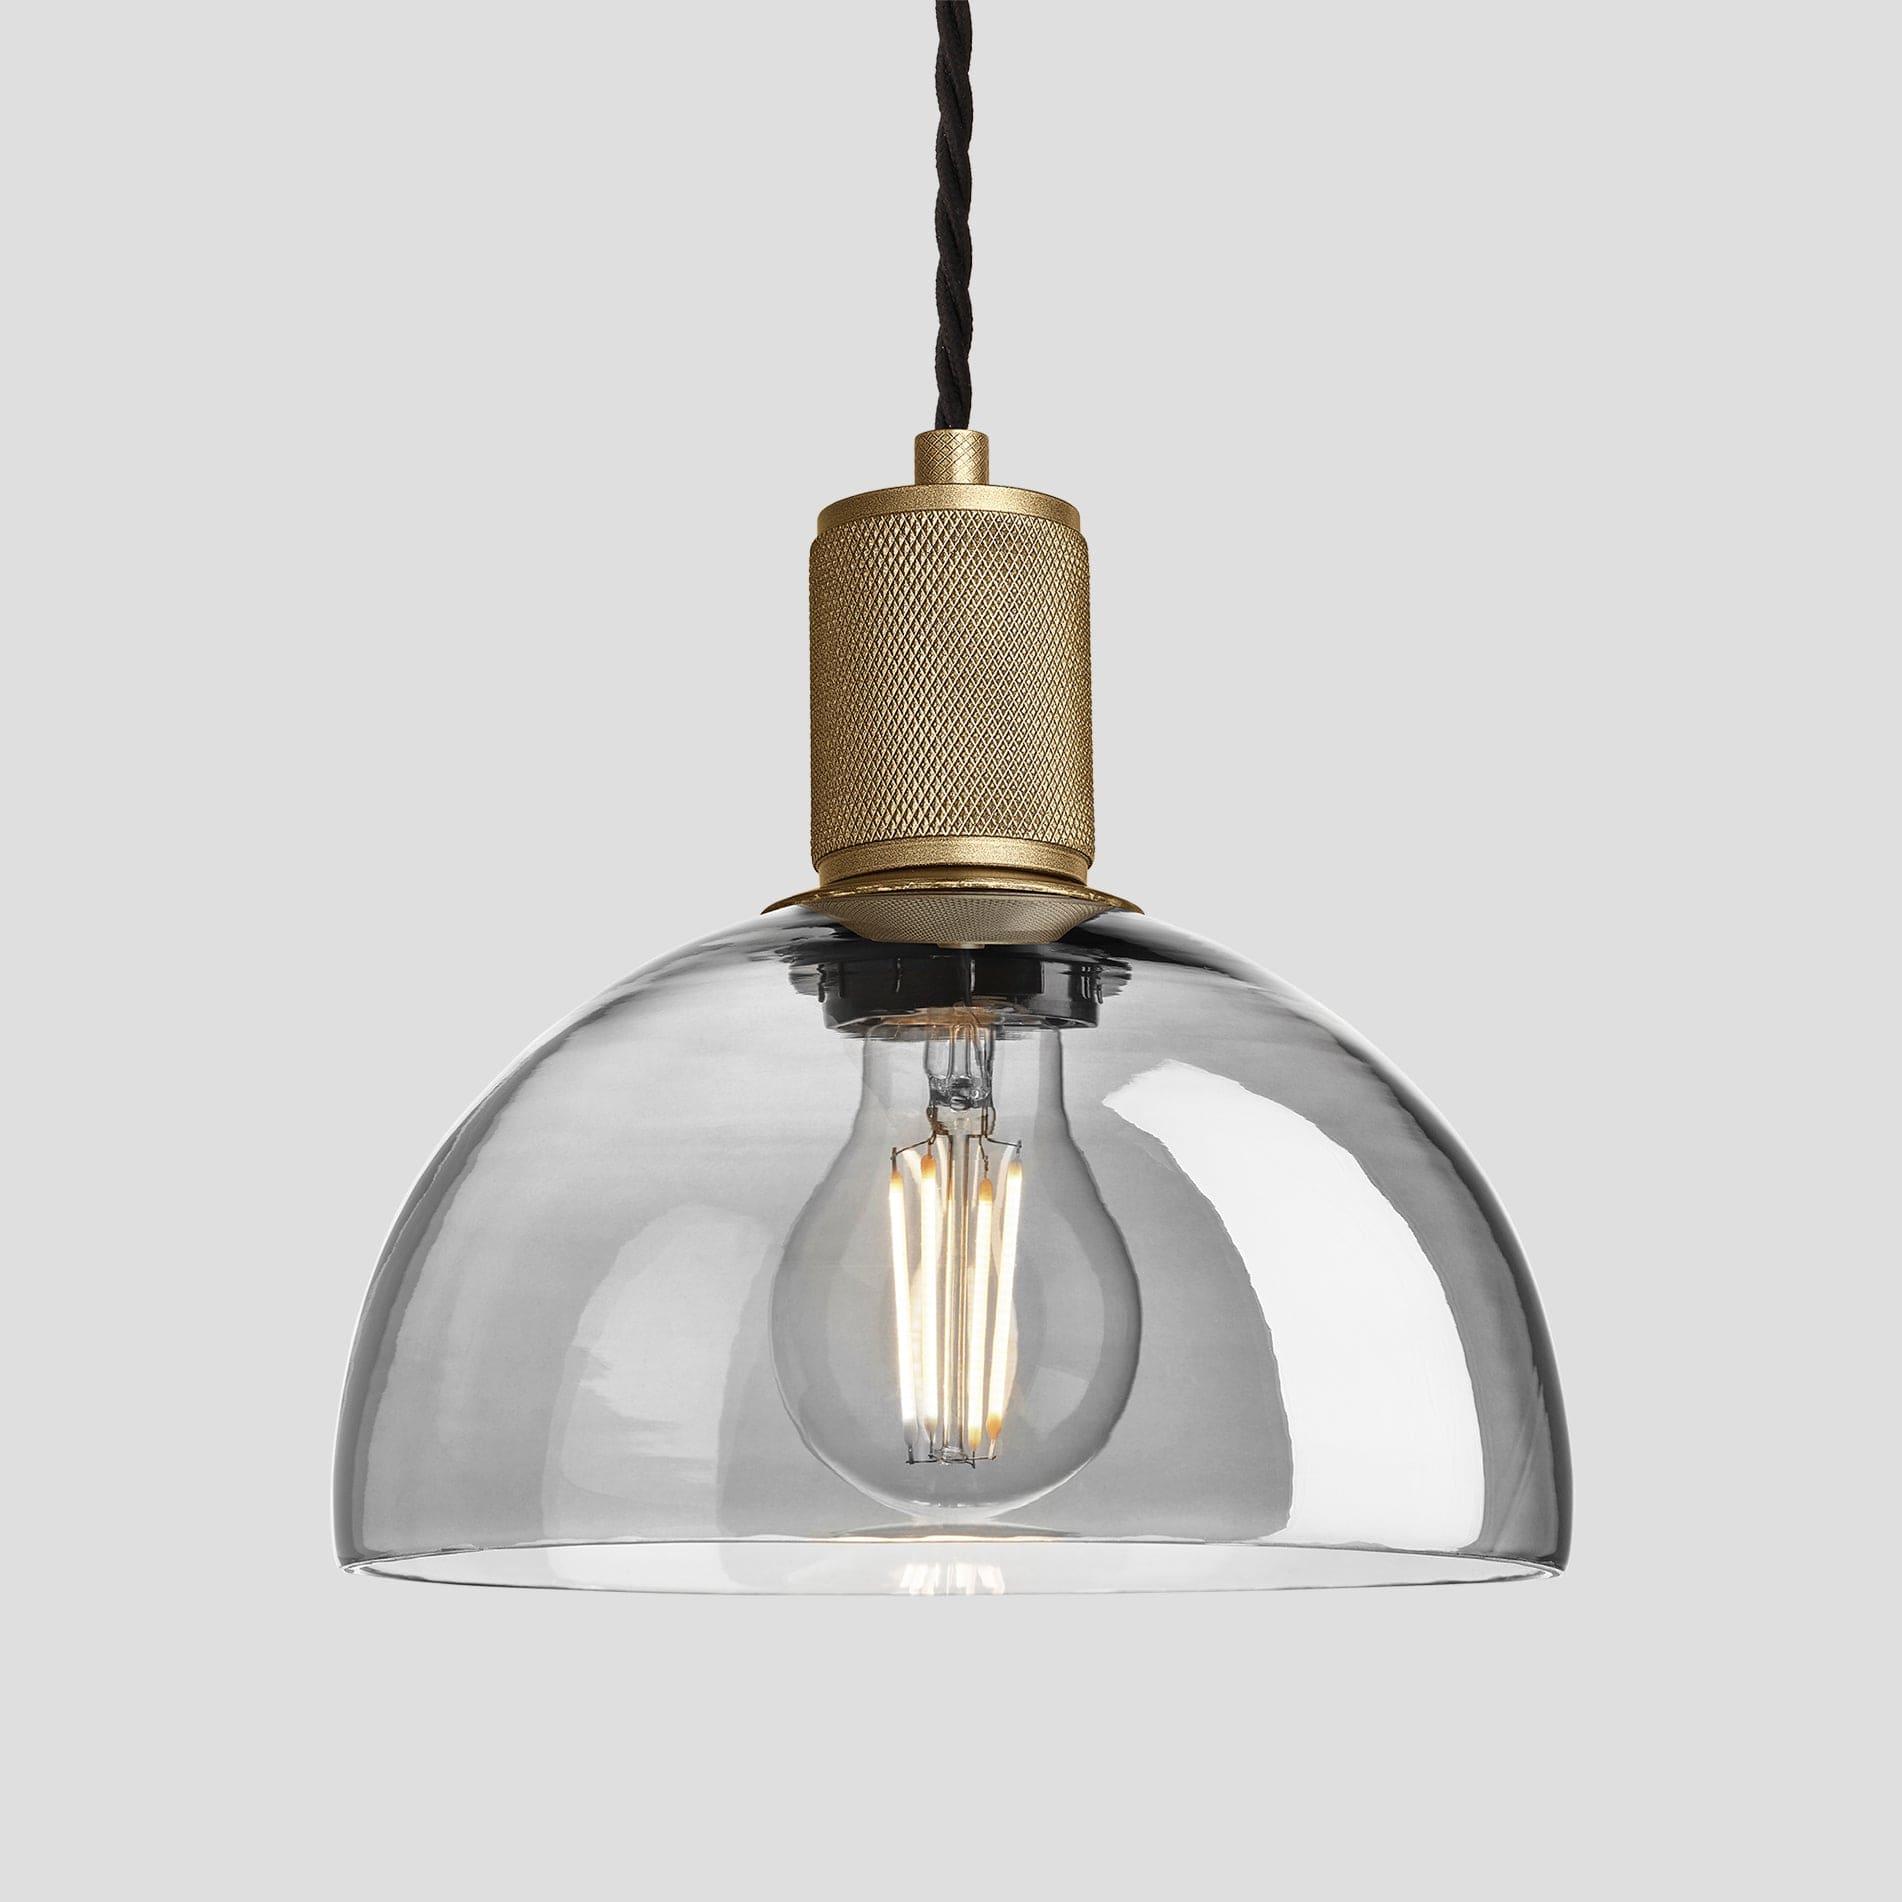 Knurled Tinted Glass Dome Pendant Light - 8 Inch - Smoke Grey Industville KN-TGL-DP8-SG-BH